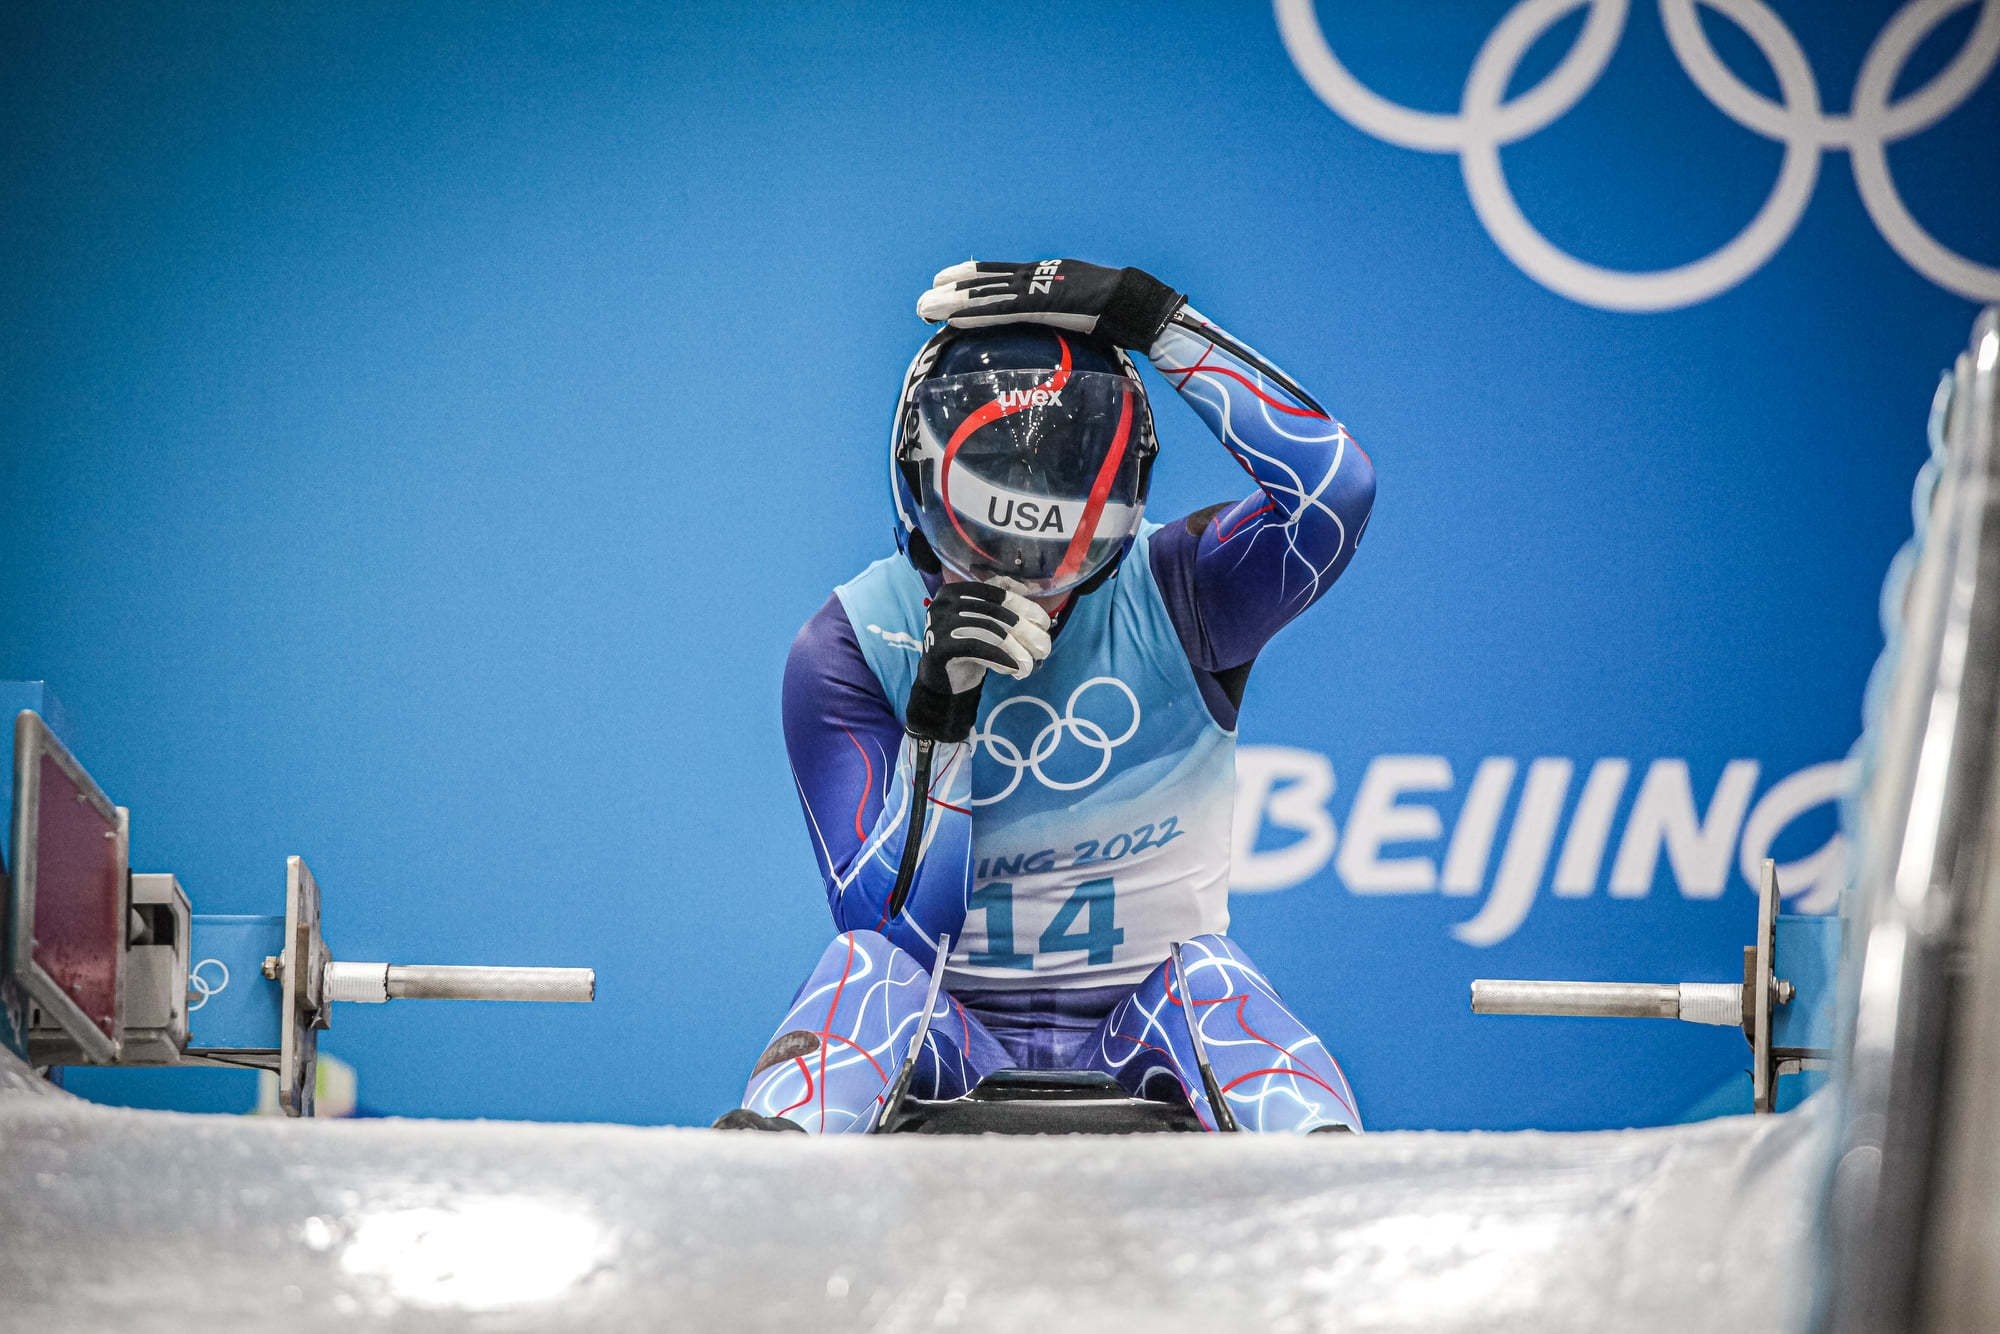 Luge: An American luger competes at the 2022 Beijing Winter Olympics. 2000x1340 HD Wallpaper.